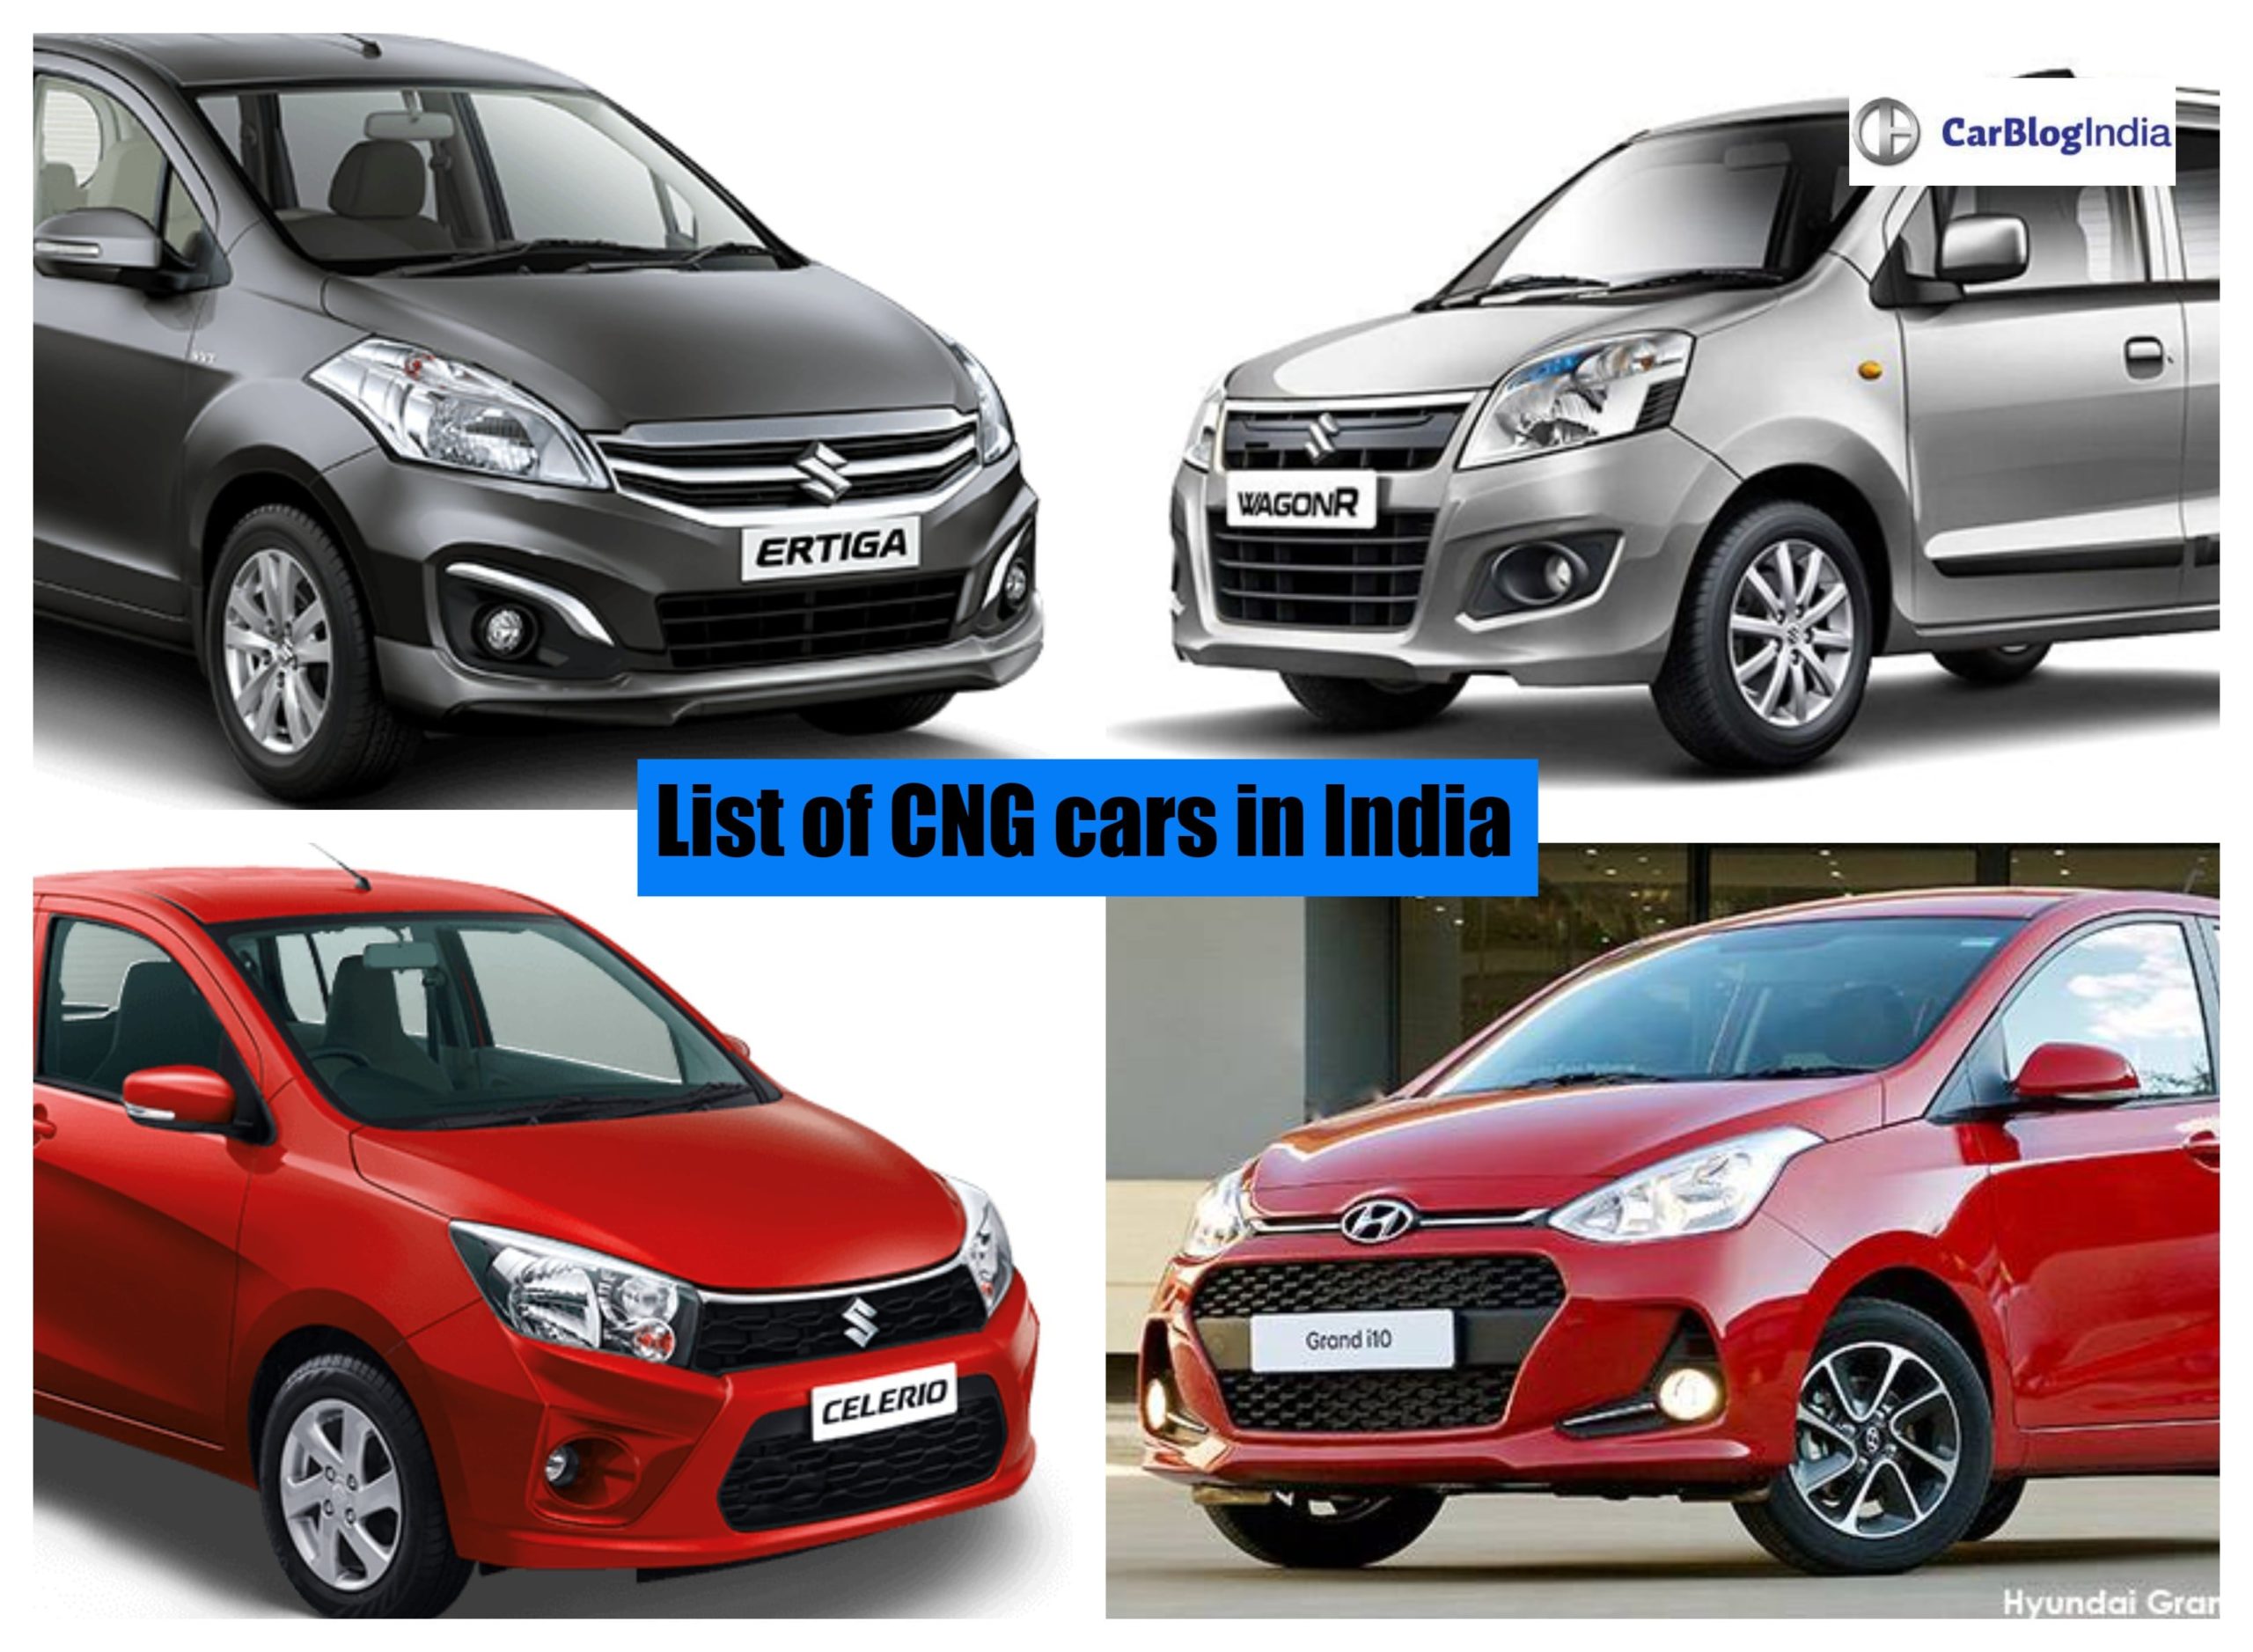 Maruti's CNG is a great car, know the price